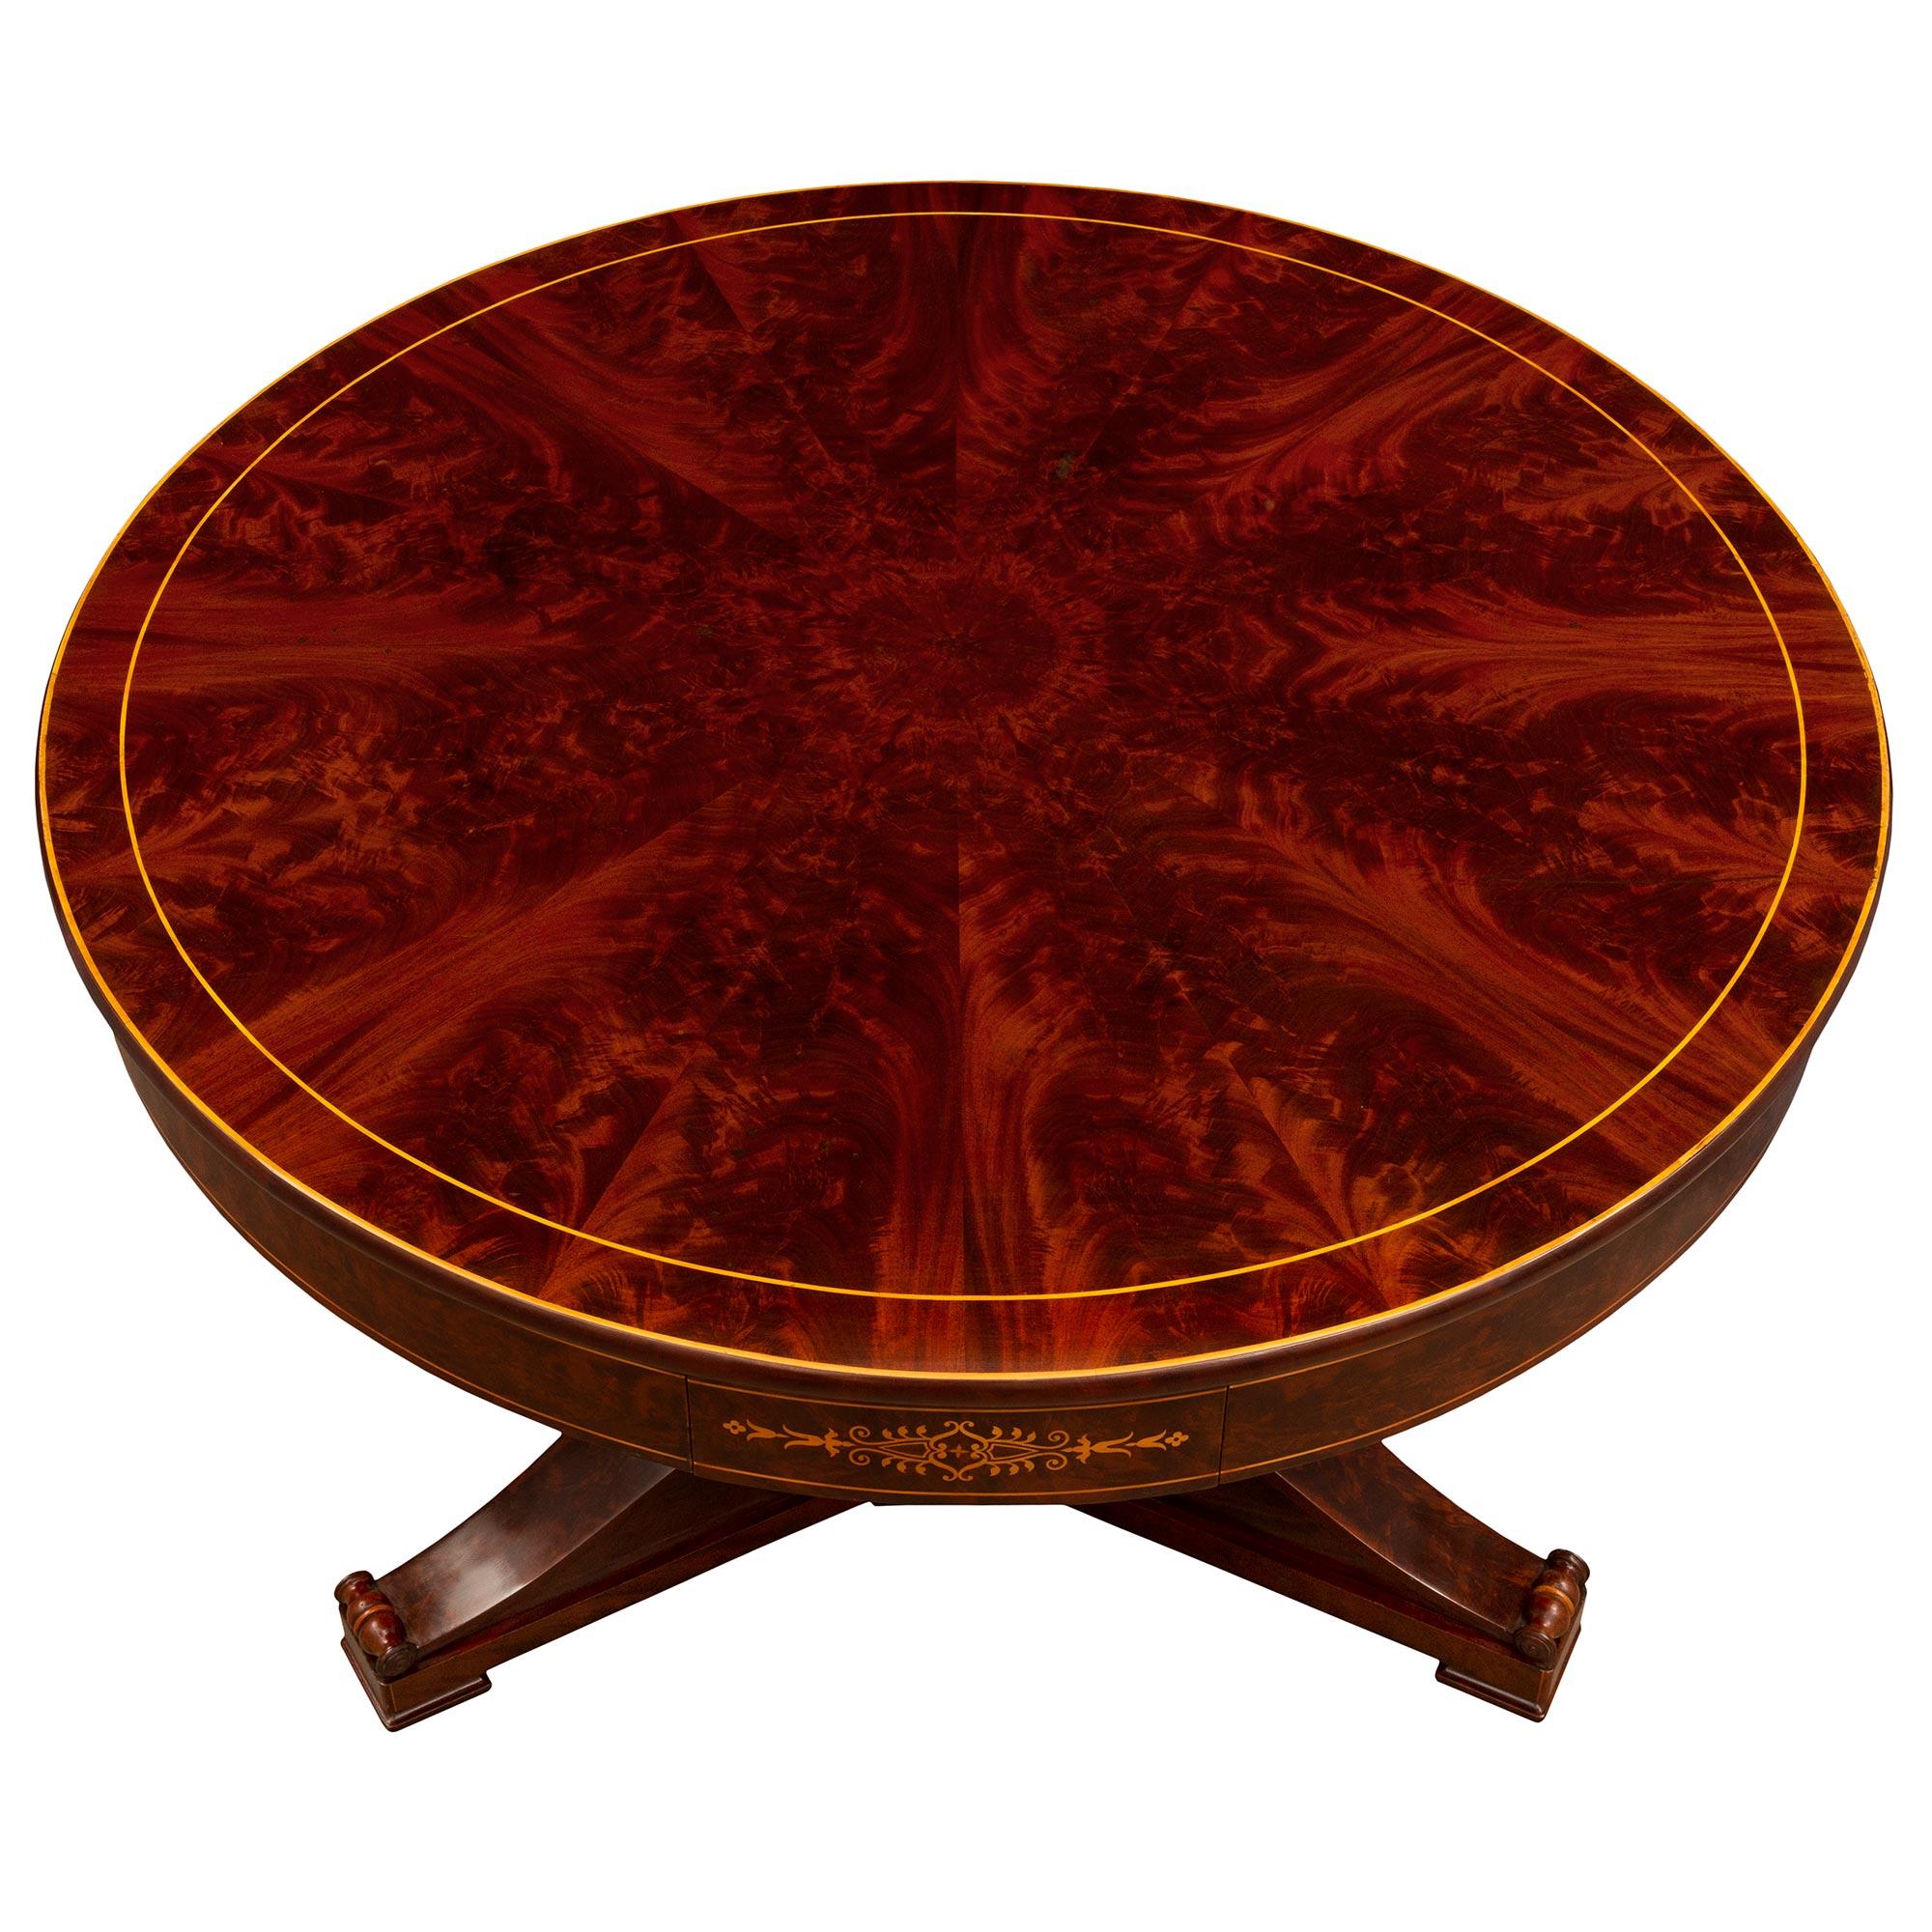 A beautiful and most decorative French 19th century Charles X period flamed Mahogany and Maplewood center table. The four drawer circular center table is raised by three elegant scrolled legs with their original casters below the impressive baluster